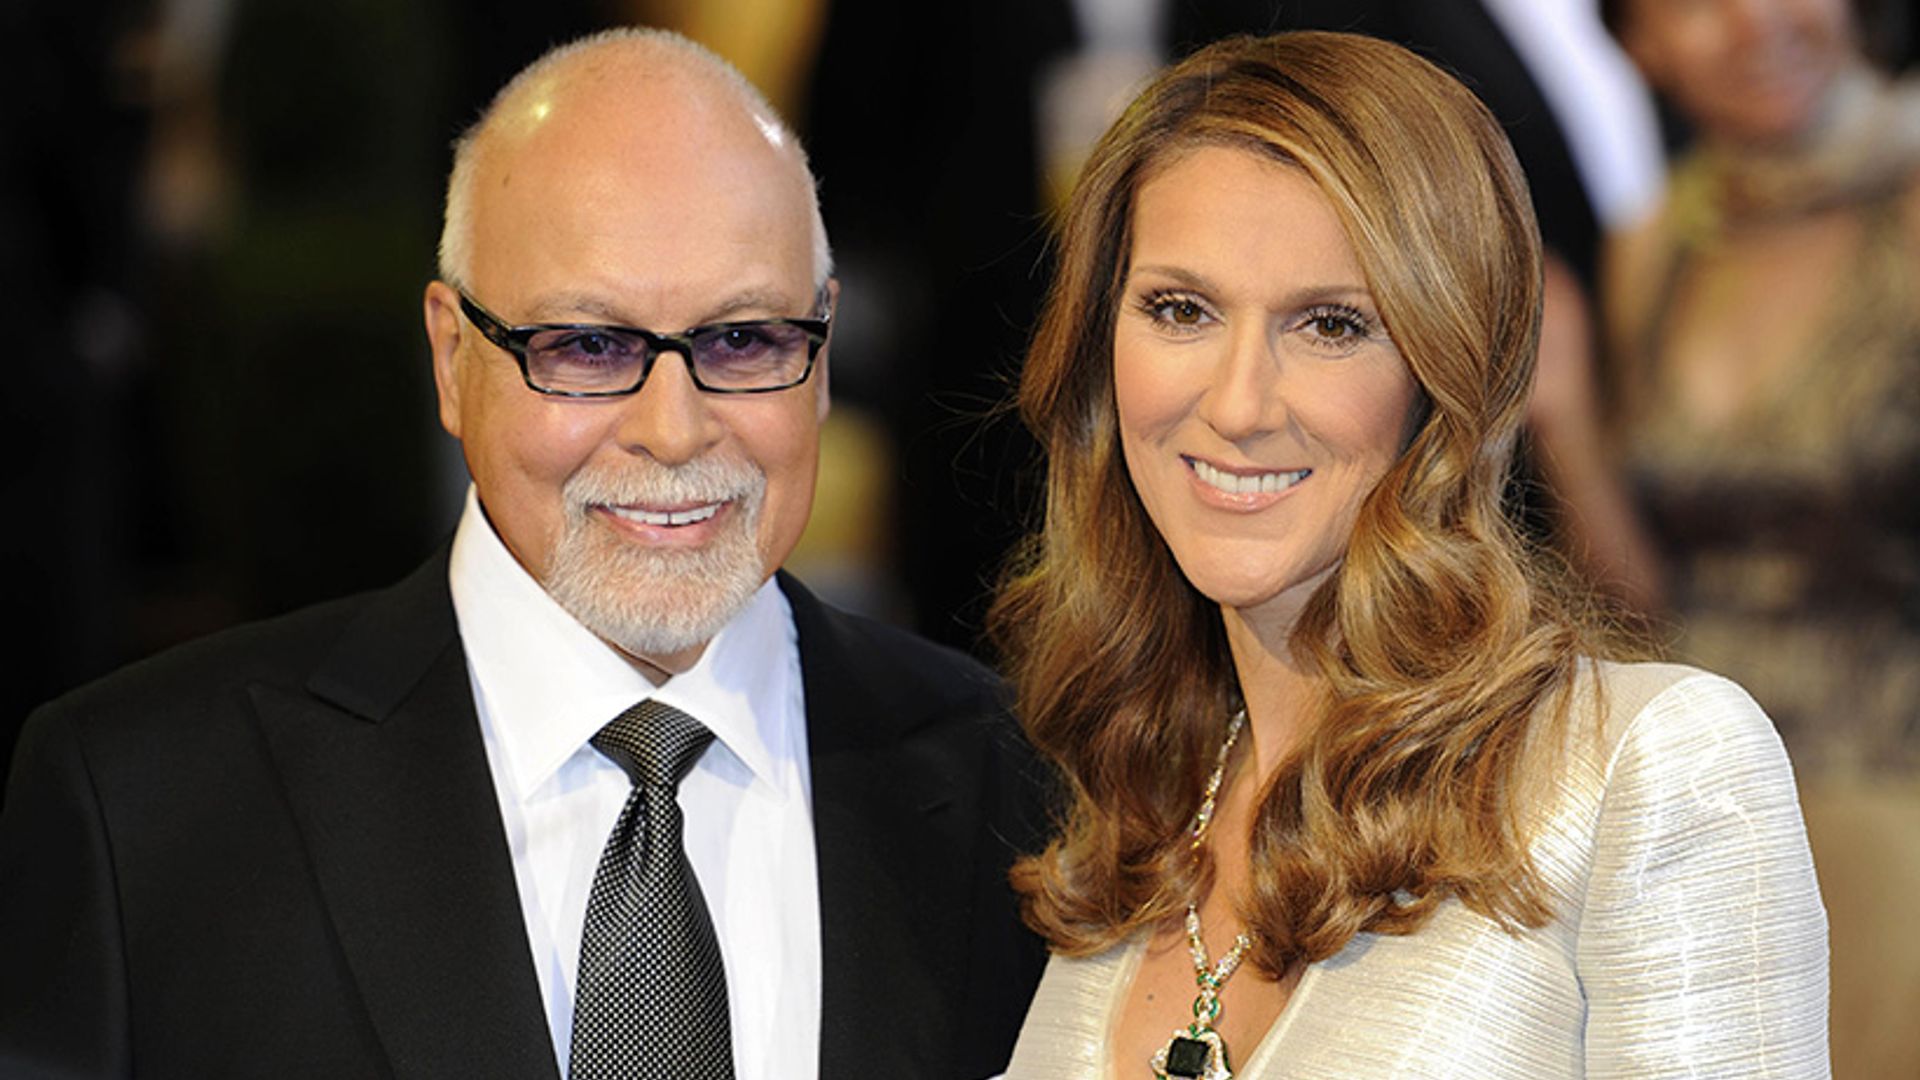 Celine Dion reveals late husband René Angélil is only man she has ever kissed: 'I'm still in love with him'